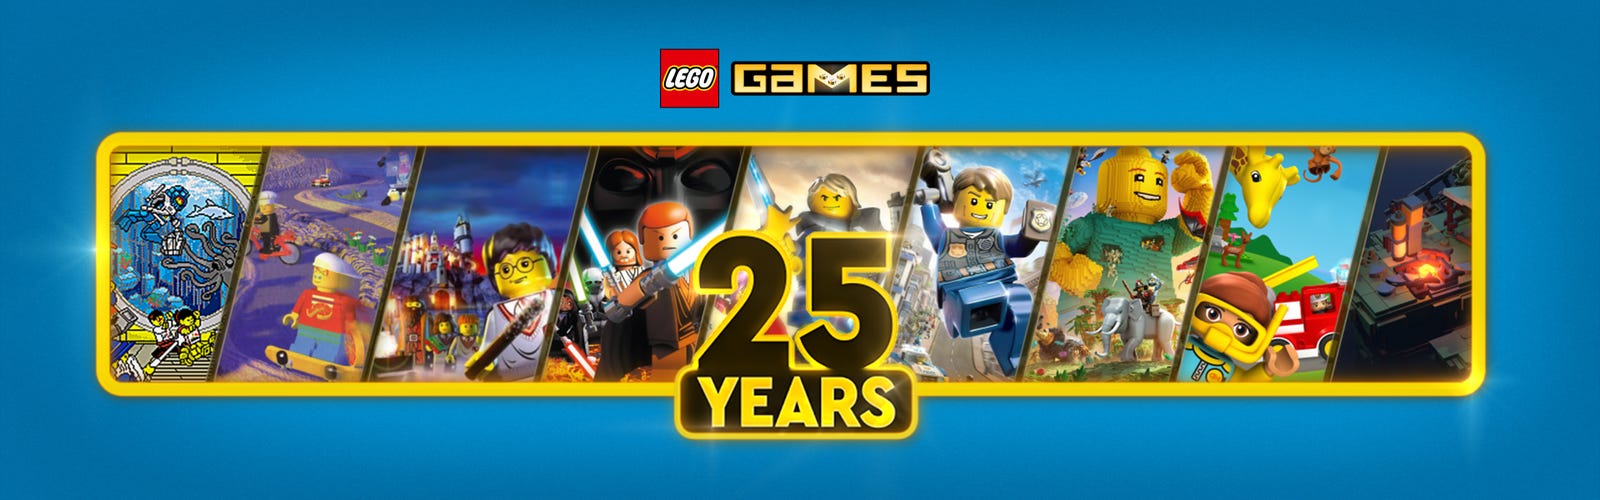 Retro LEGO® PC Games from the 1990s | LEGO® Shop US